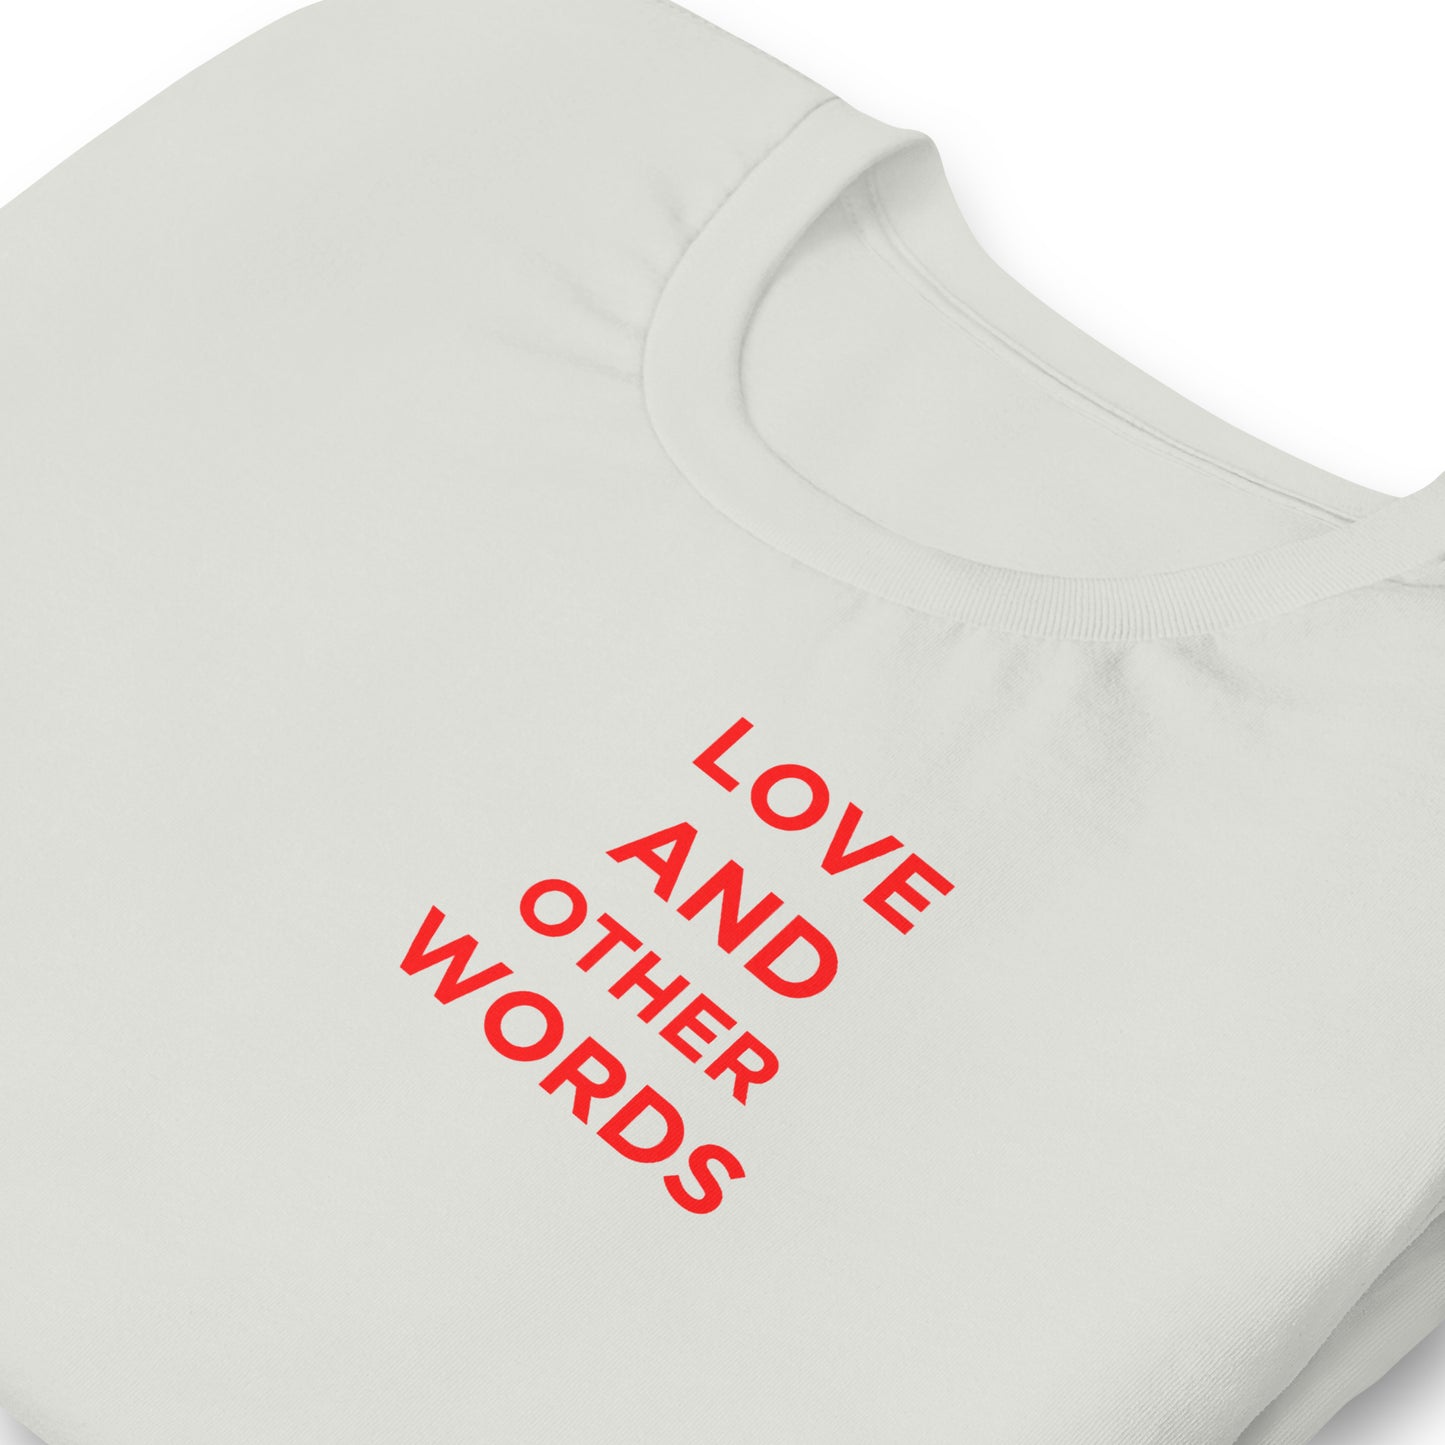 Love and Other Words T-Shirt